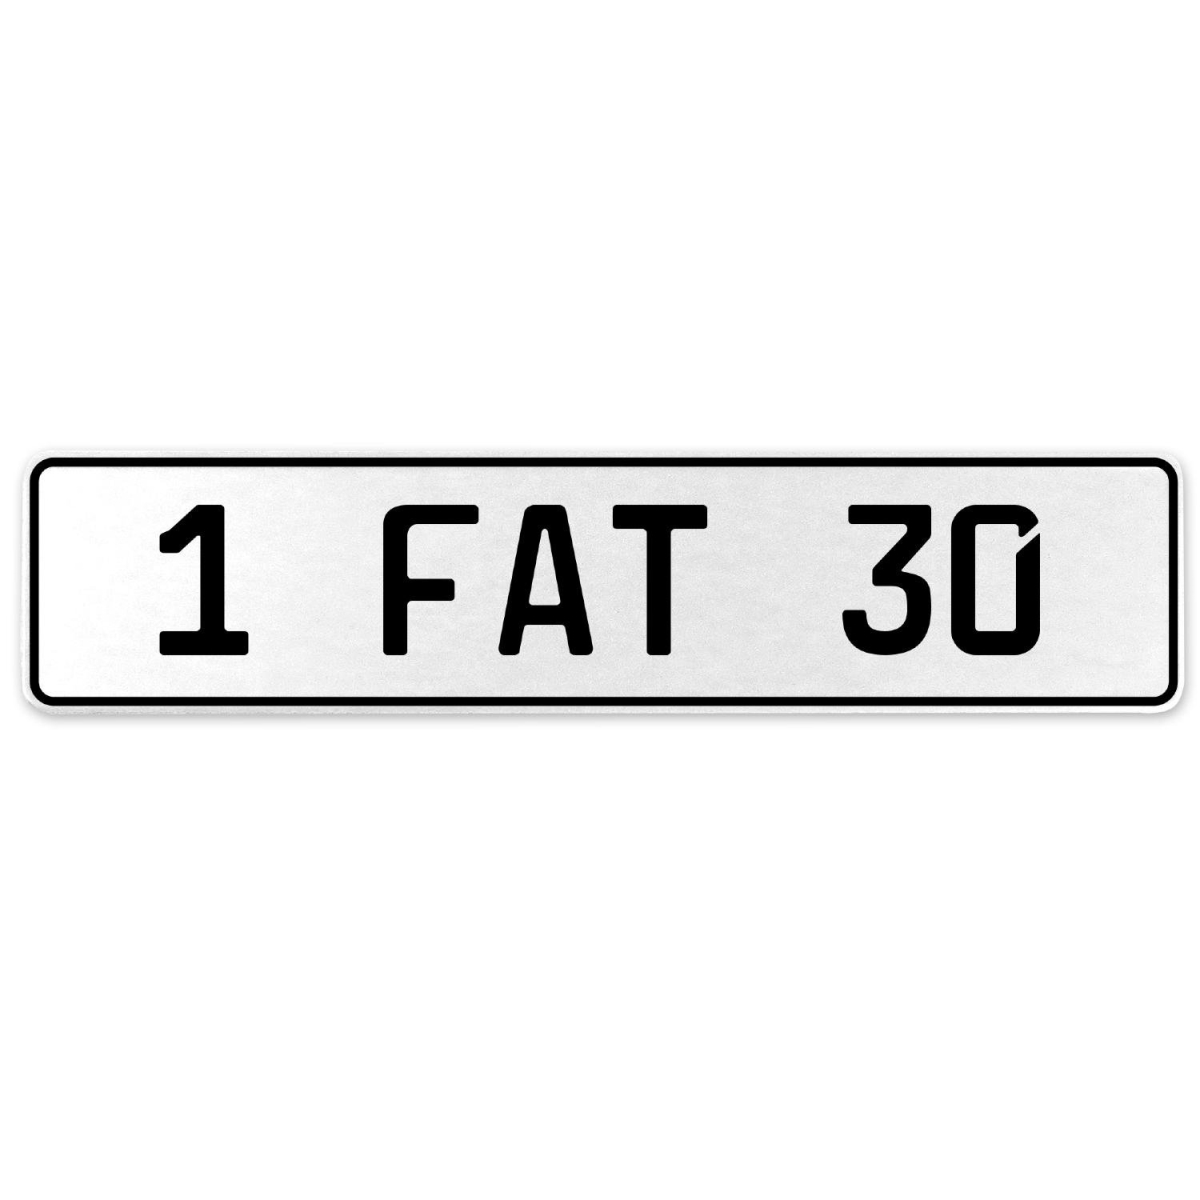 554627 1 Fat 30 - White Aluminum Street Sign Mancave Euro Plate Name Door Sign Wall